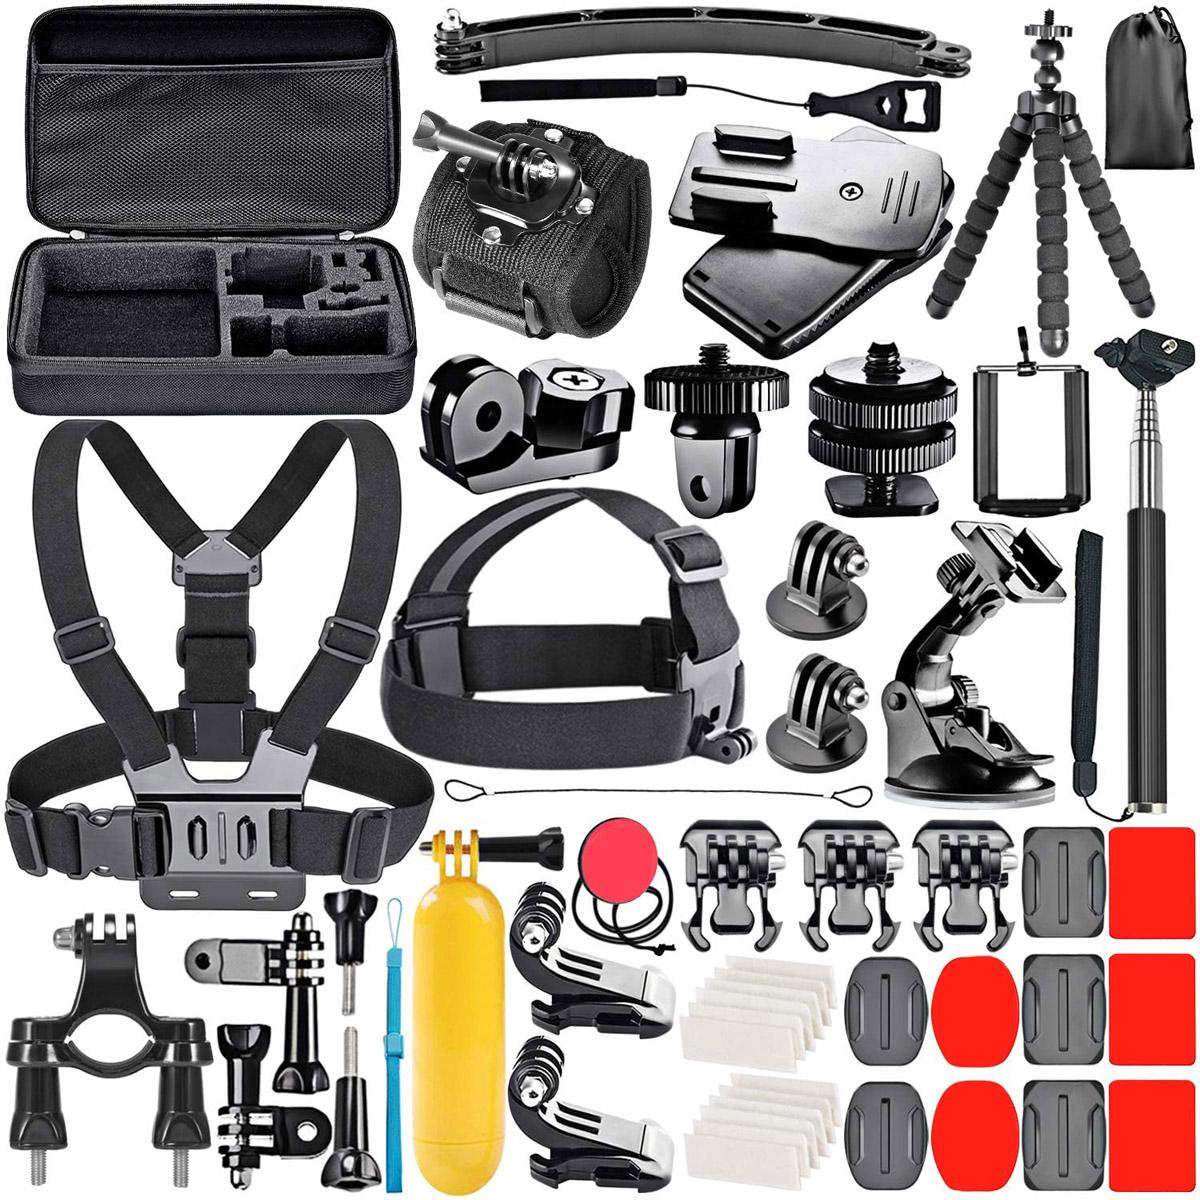 53 GoPro Action Camera Accessory Kit for $22.79